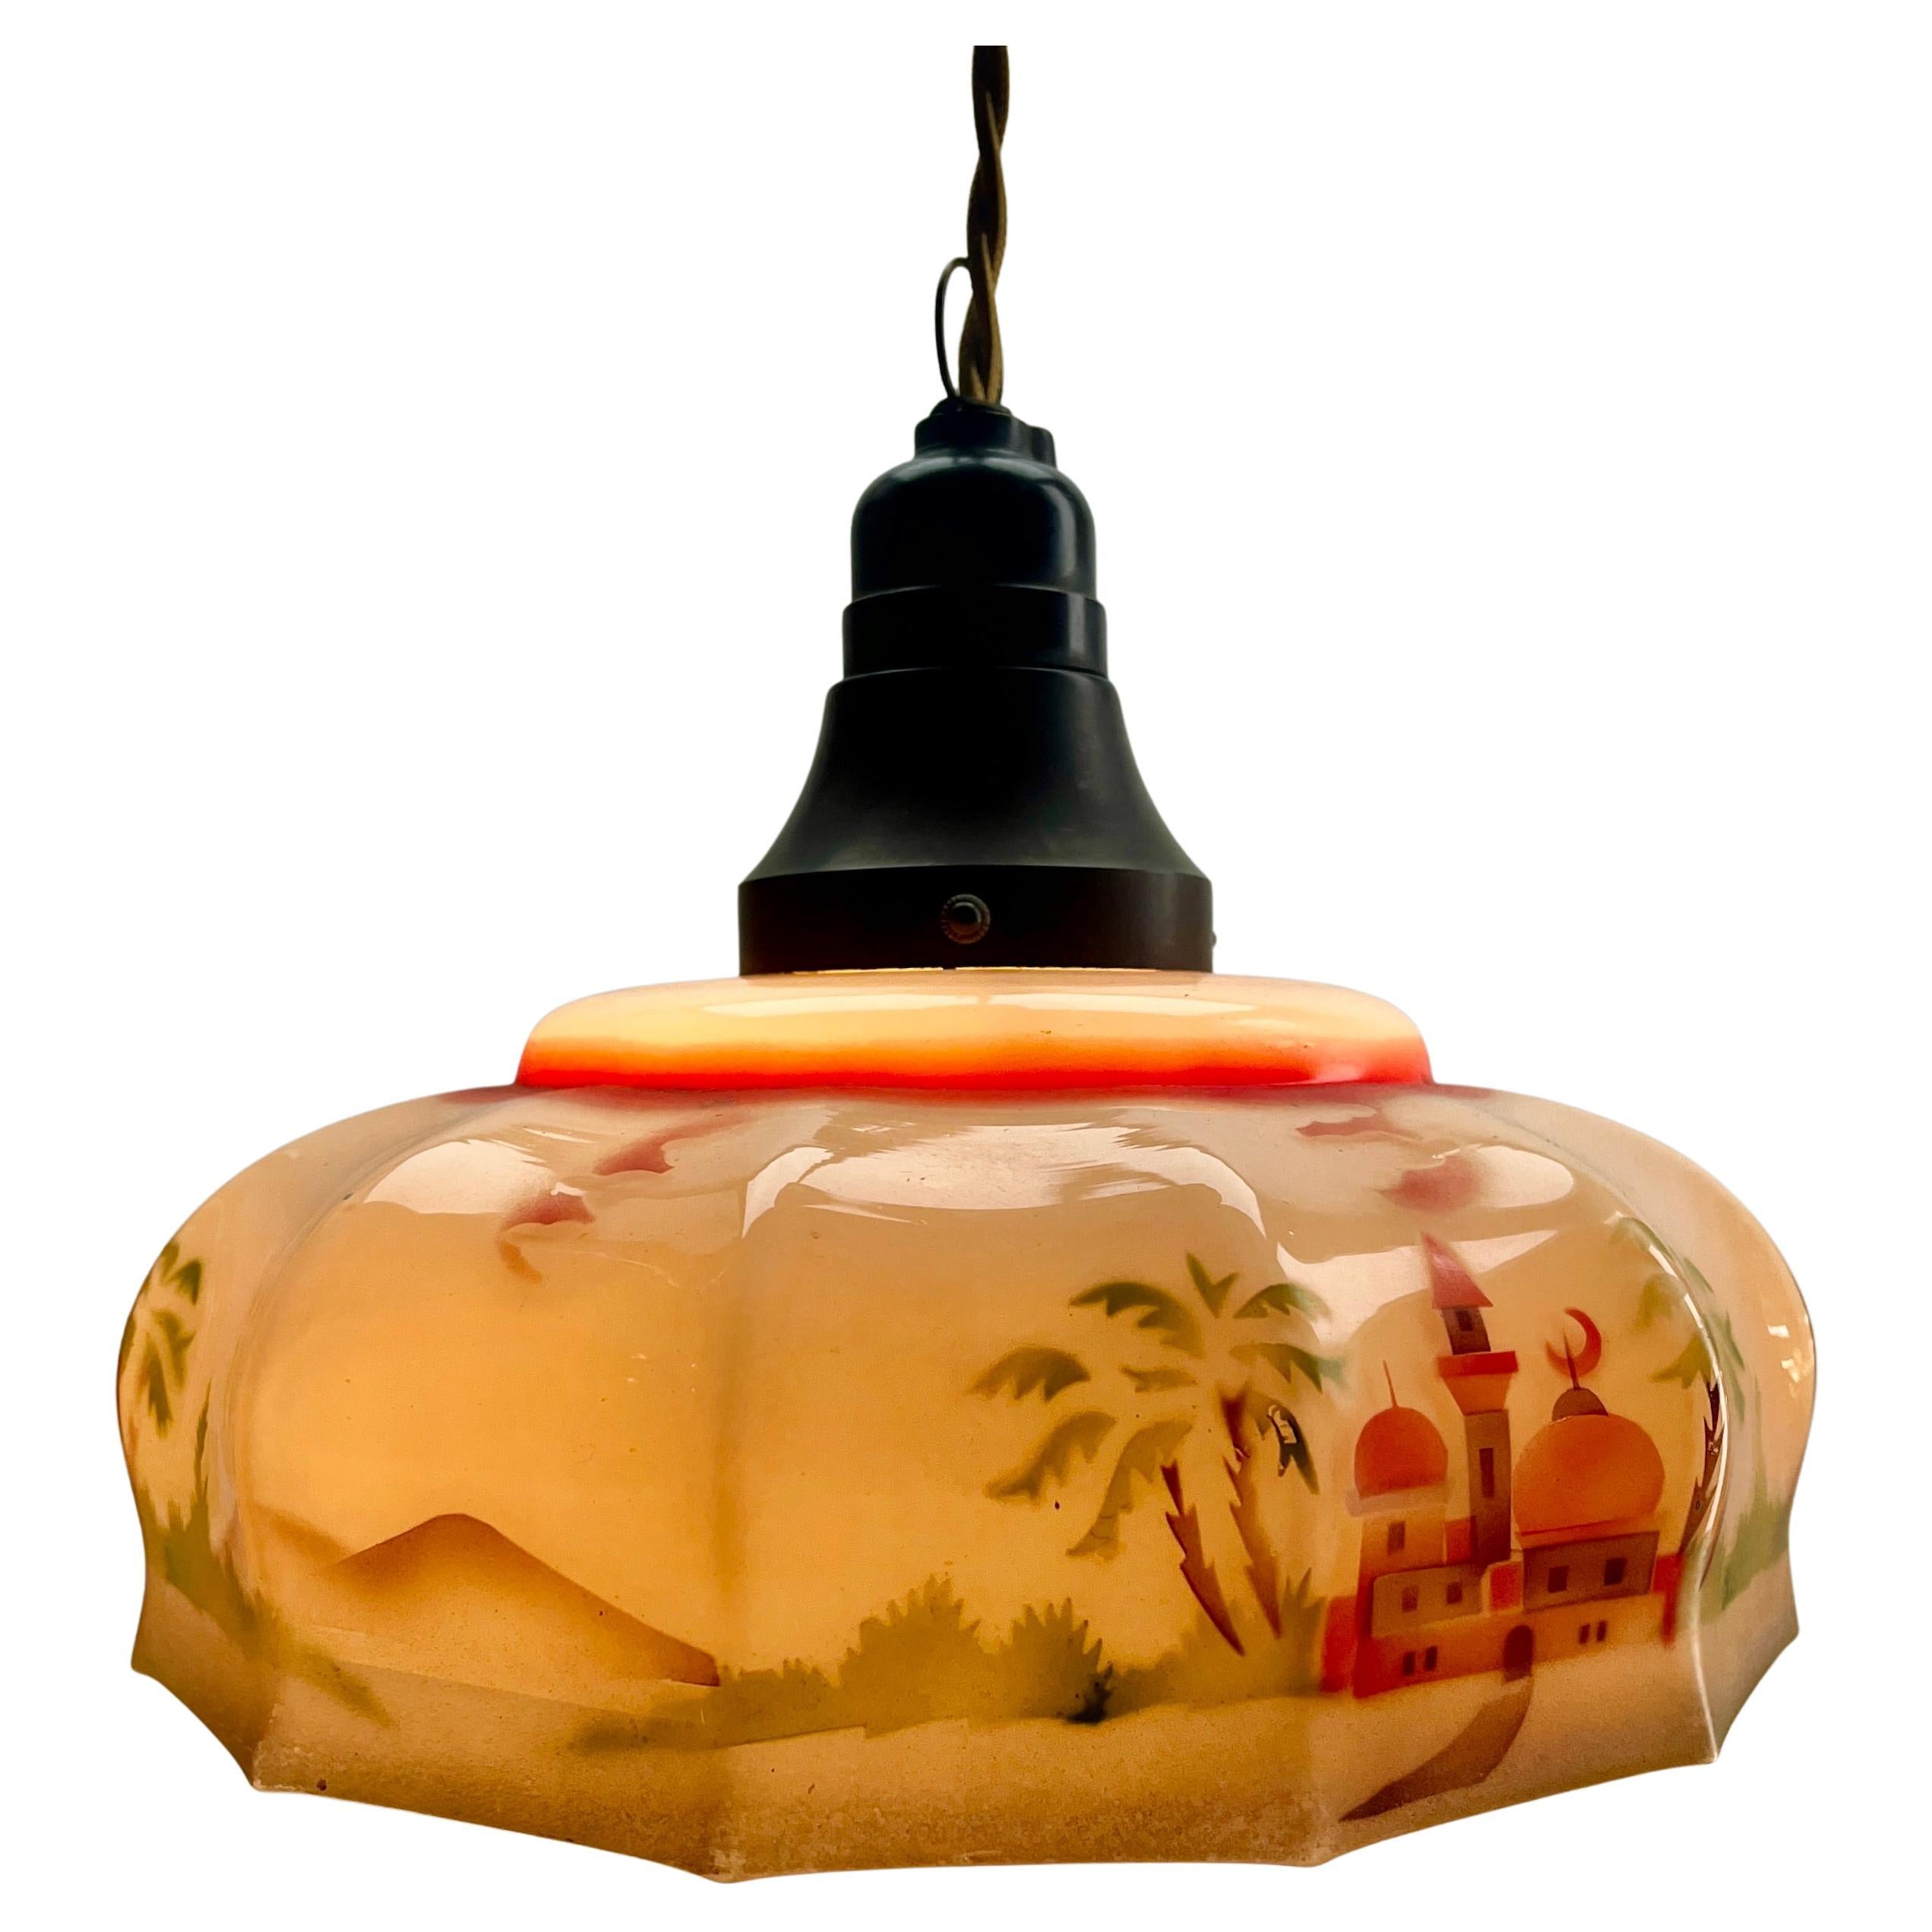 Art Deco Ceiling Lamp Bakelite fitting E27 Scailmont Belgium Glass Shade, 1930s In Good Condition For Sale In Verviers, BE